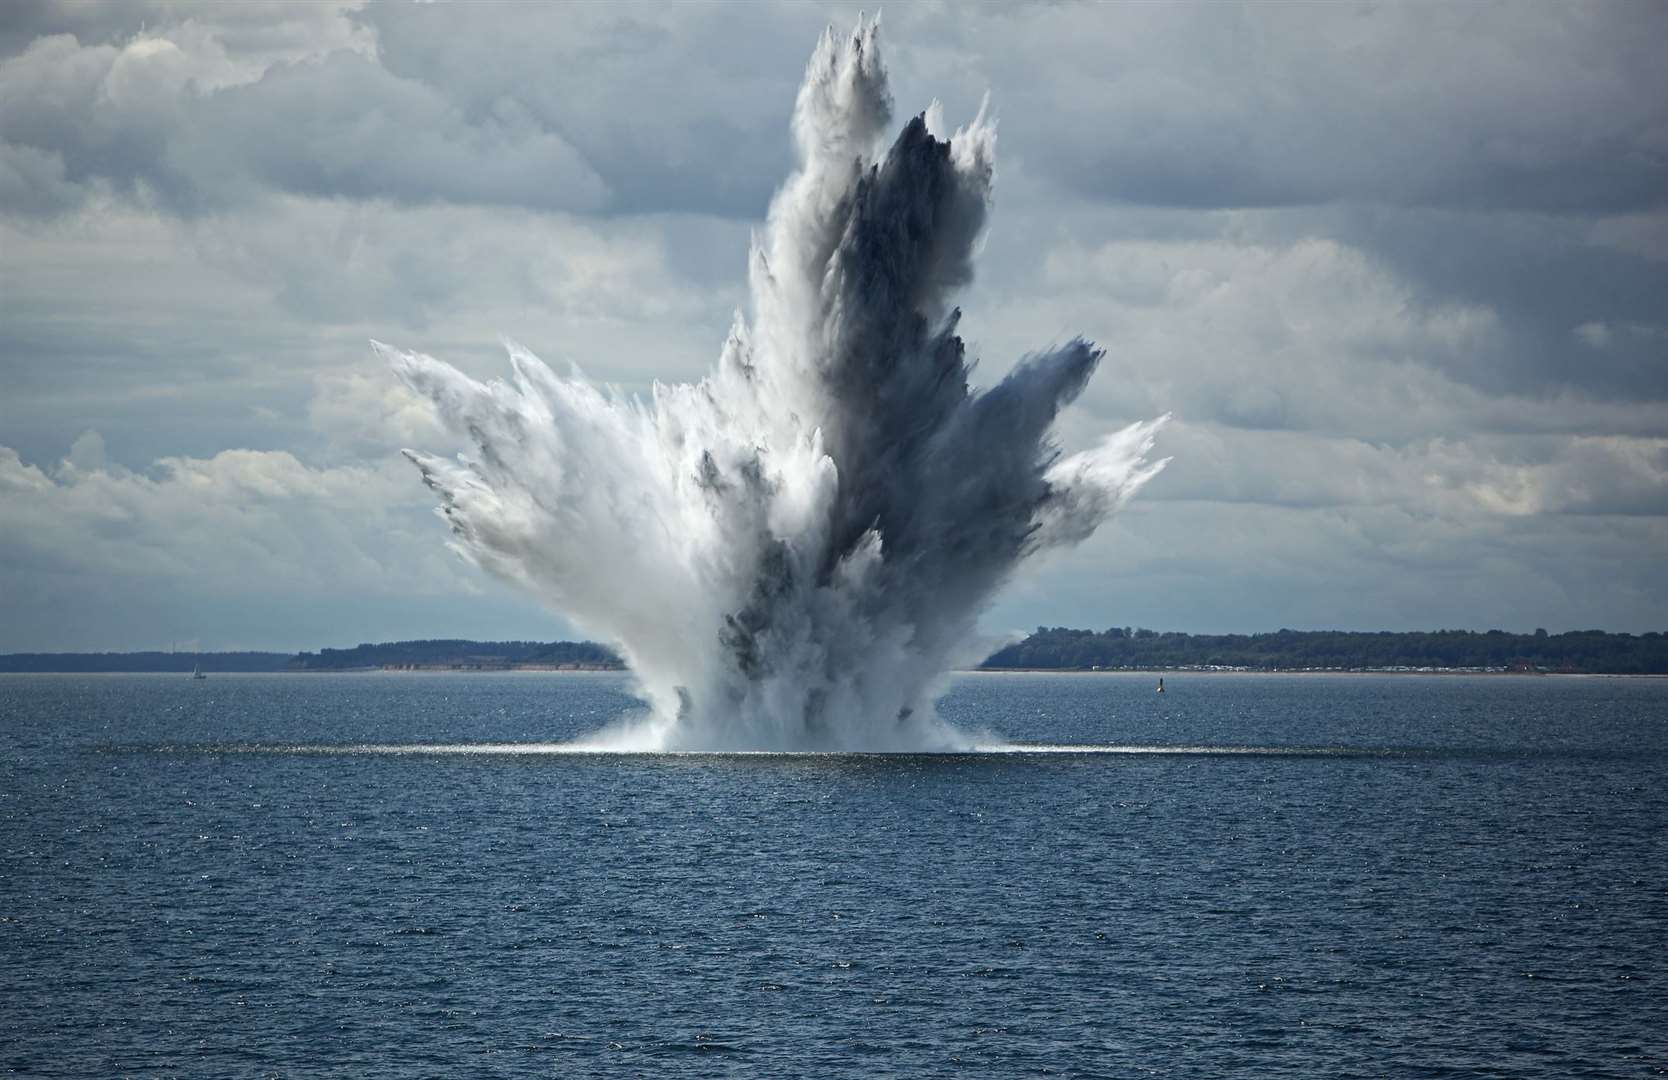 The detonation of the ship sent a plume of water into the sky - similar to this. Picture: iStock